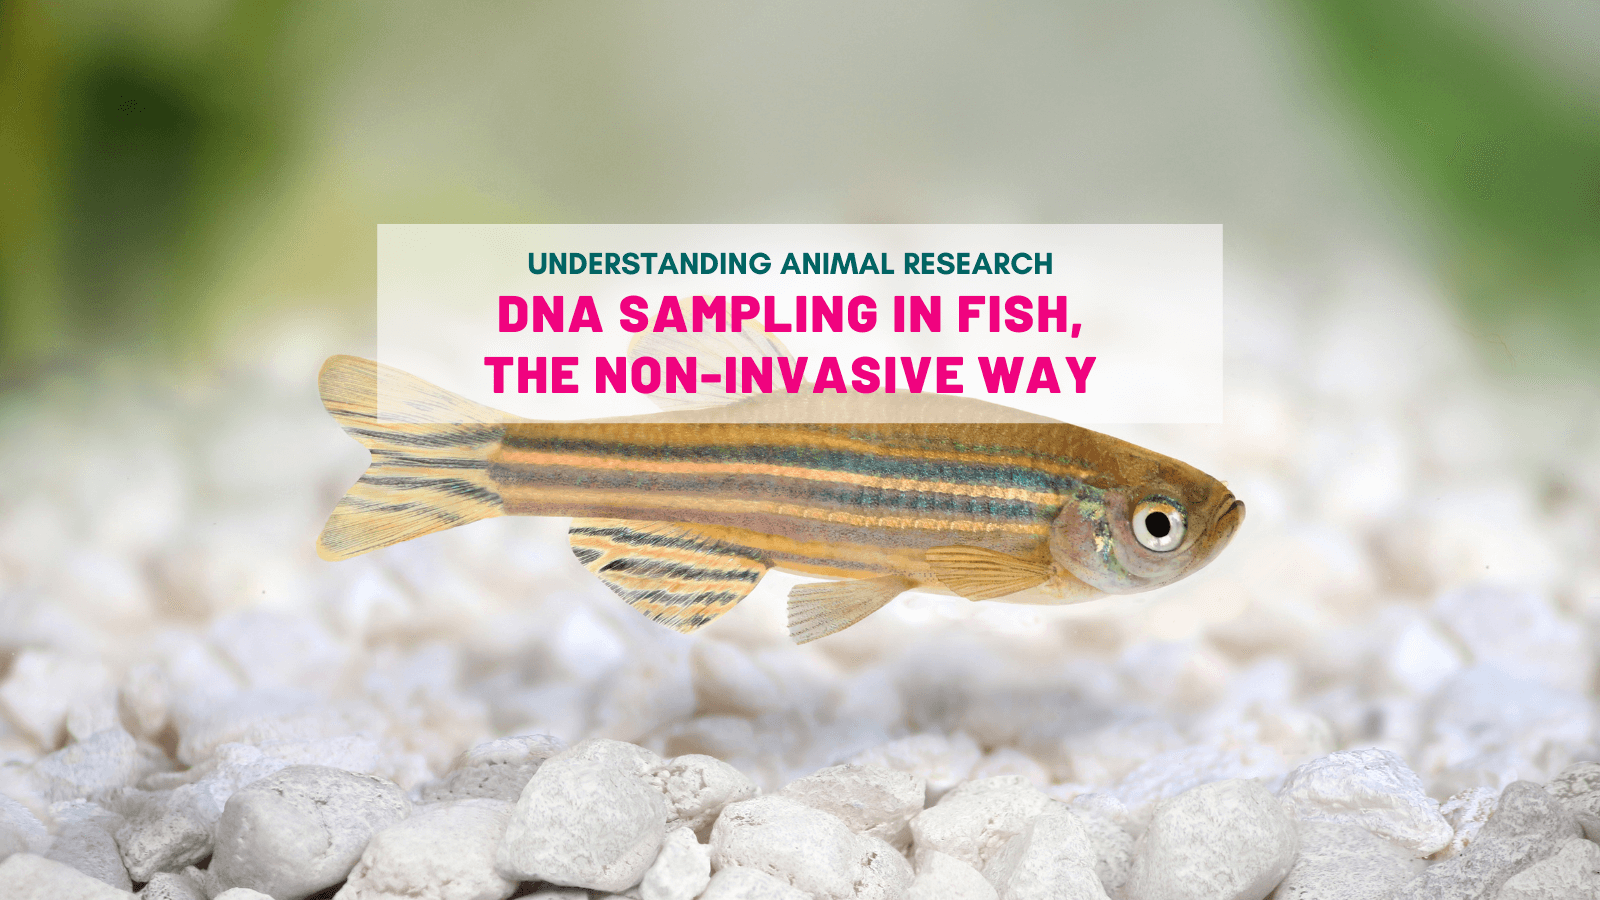 DNA sampling in fish, the non-invasive way